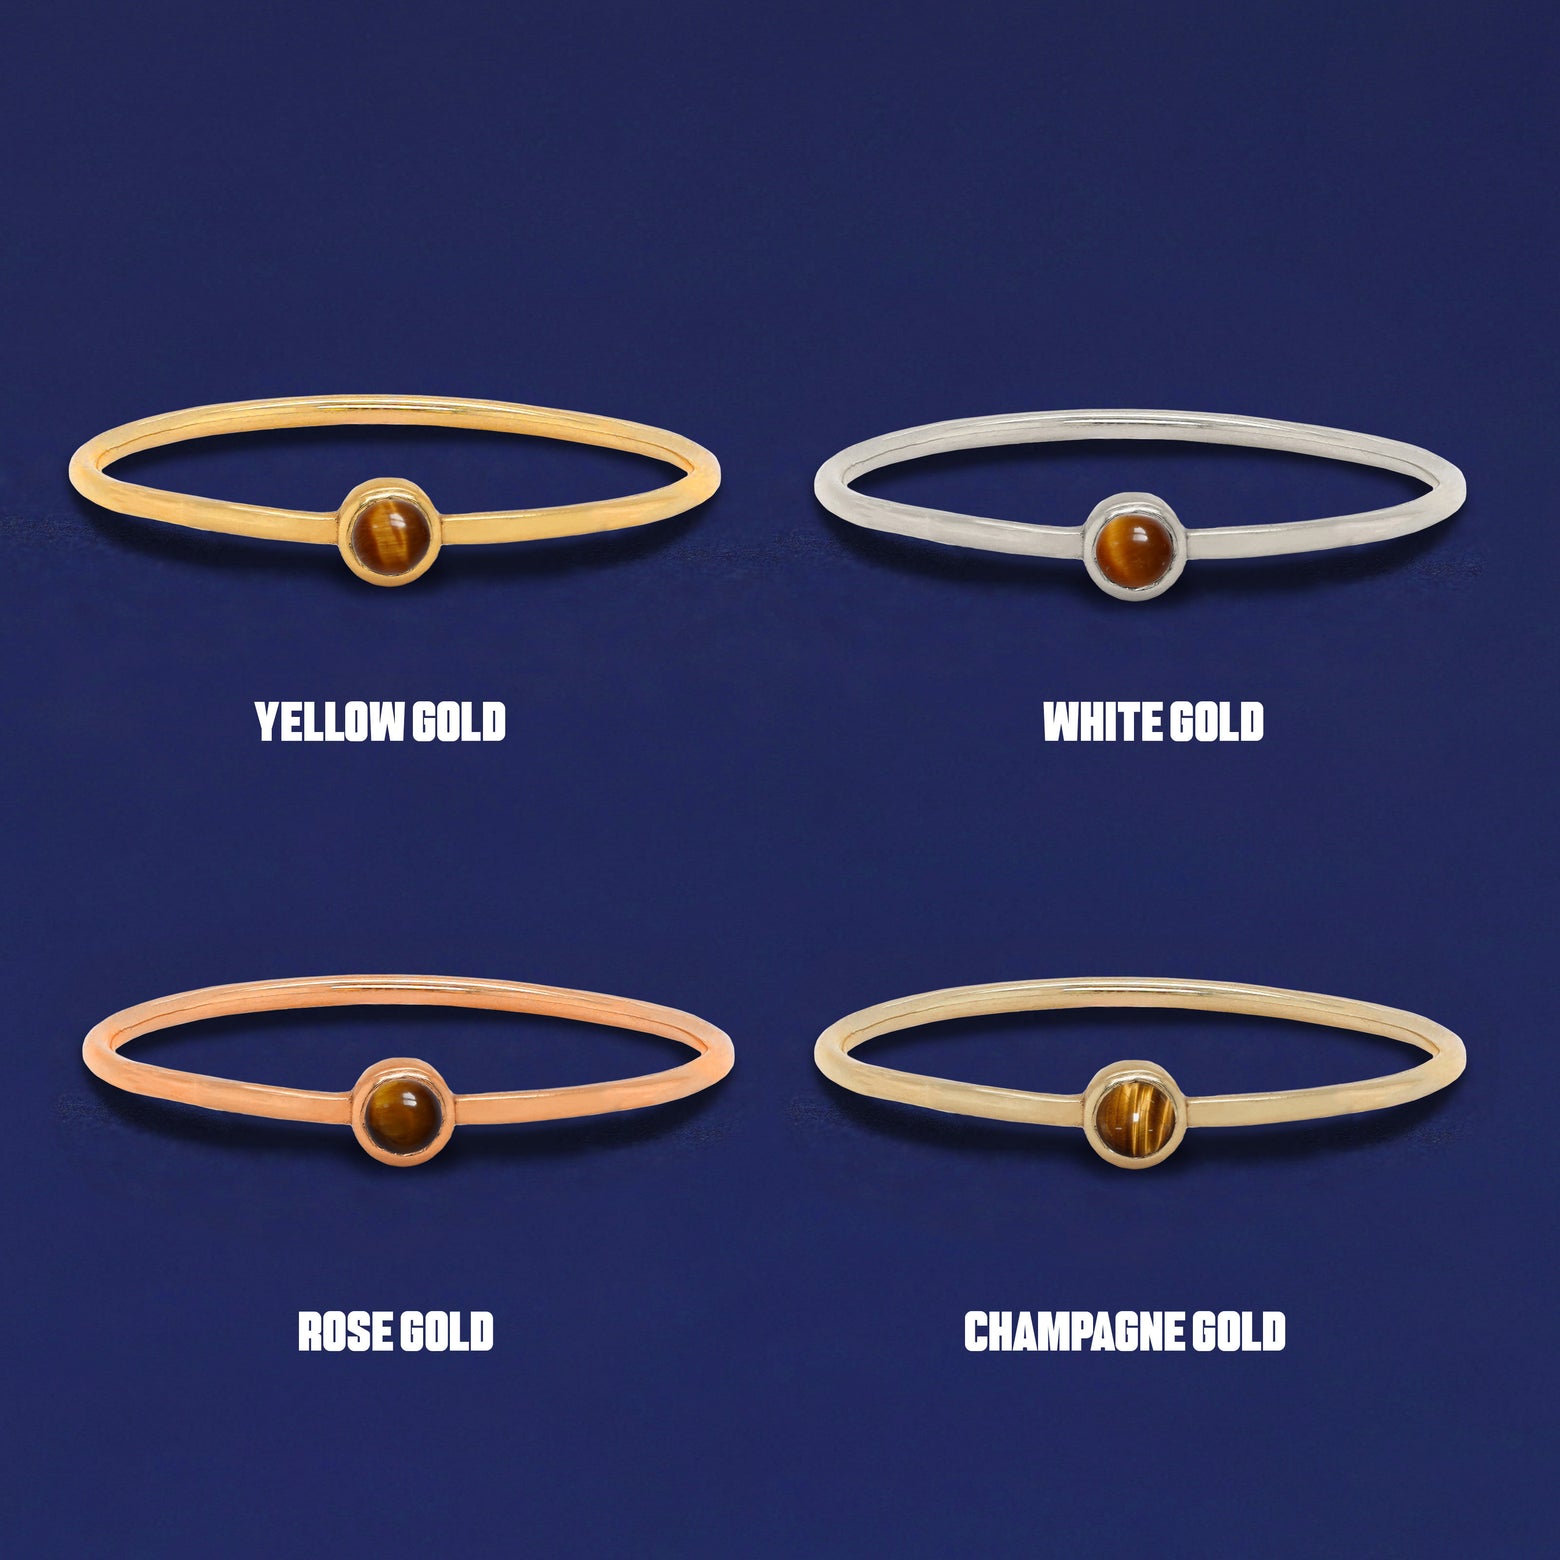 Four versions of the Tiger Eye Ring shown in options of yellow, white, rose and champagne gold